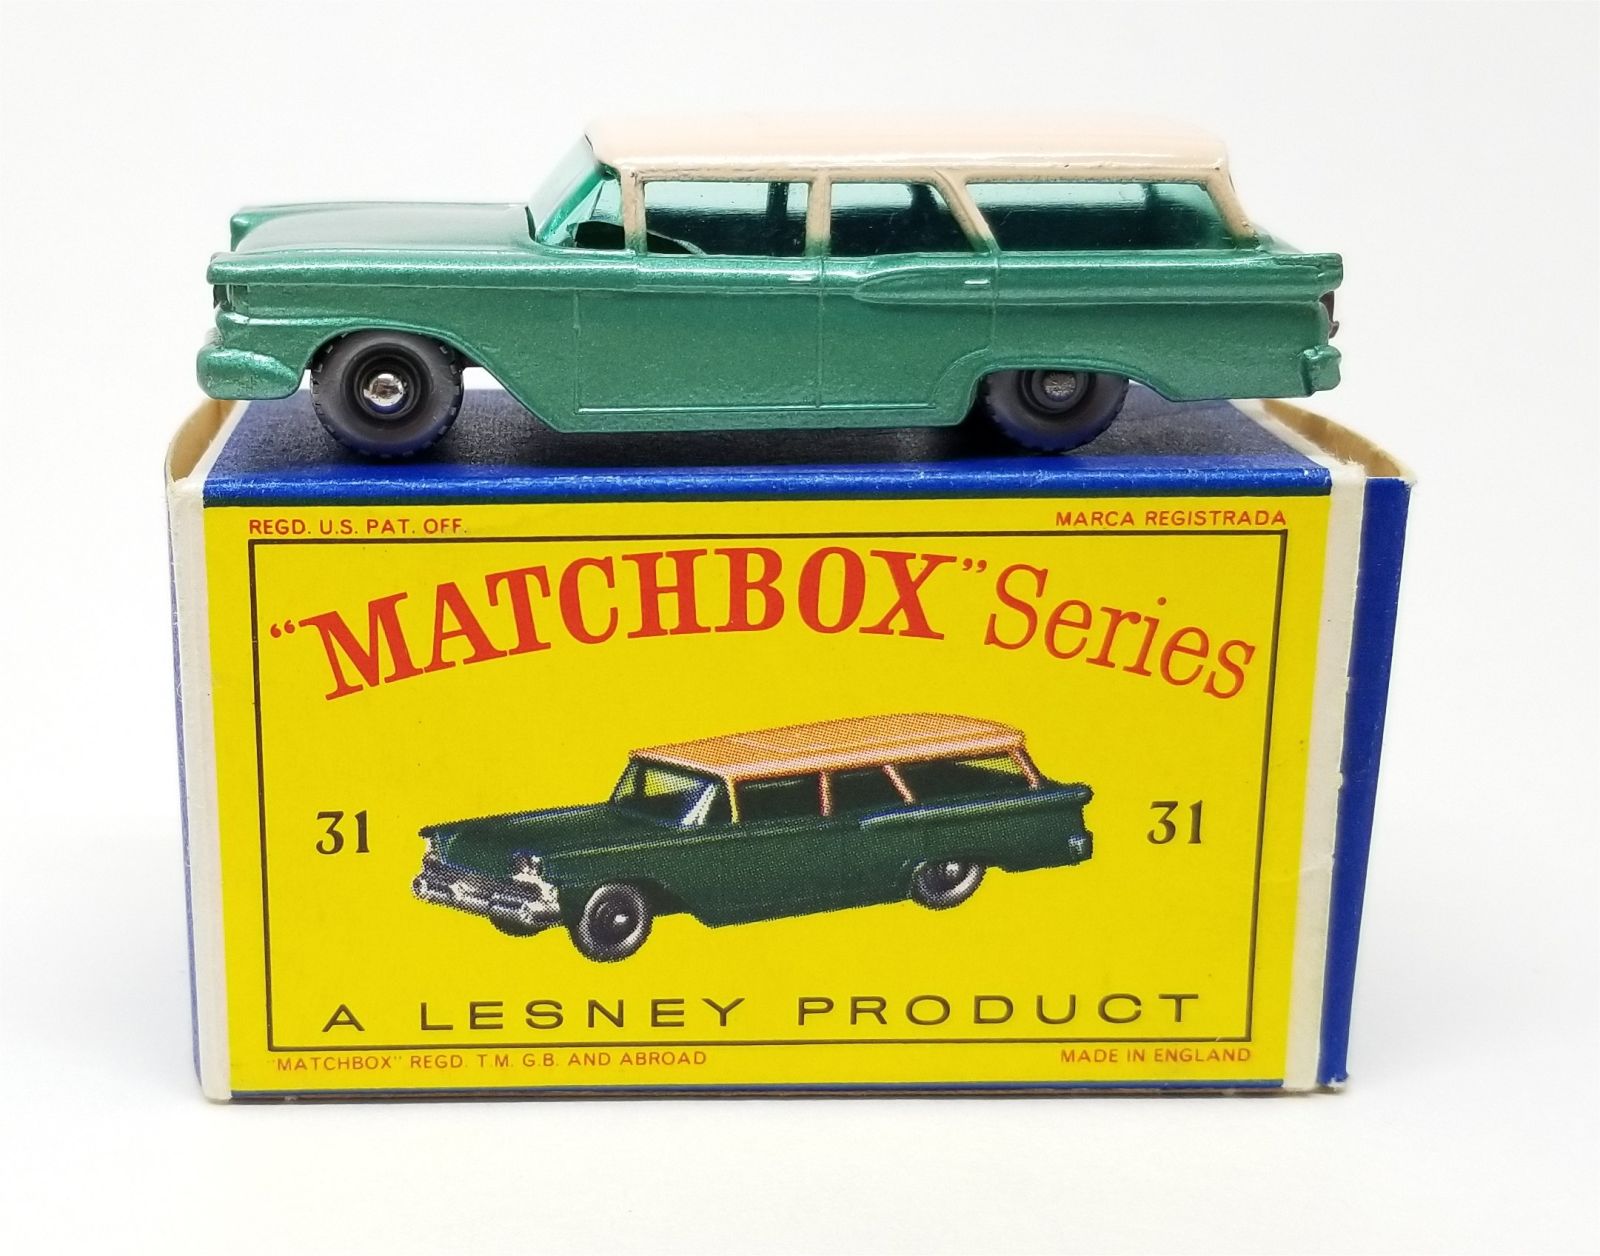 Illustration for article titled [REVIEW] Lesney Matchbox American Ford Station Wagon